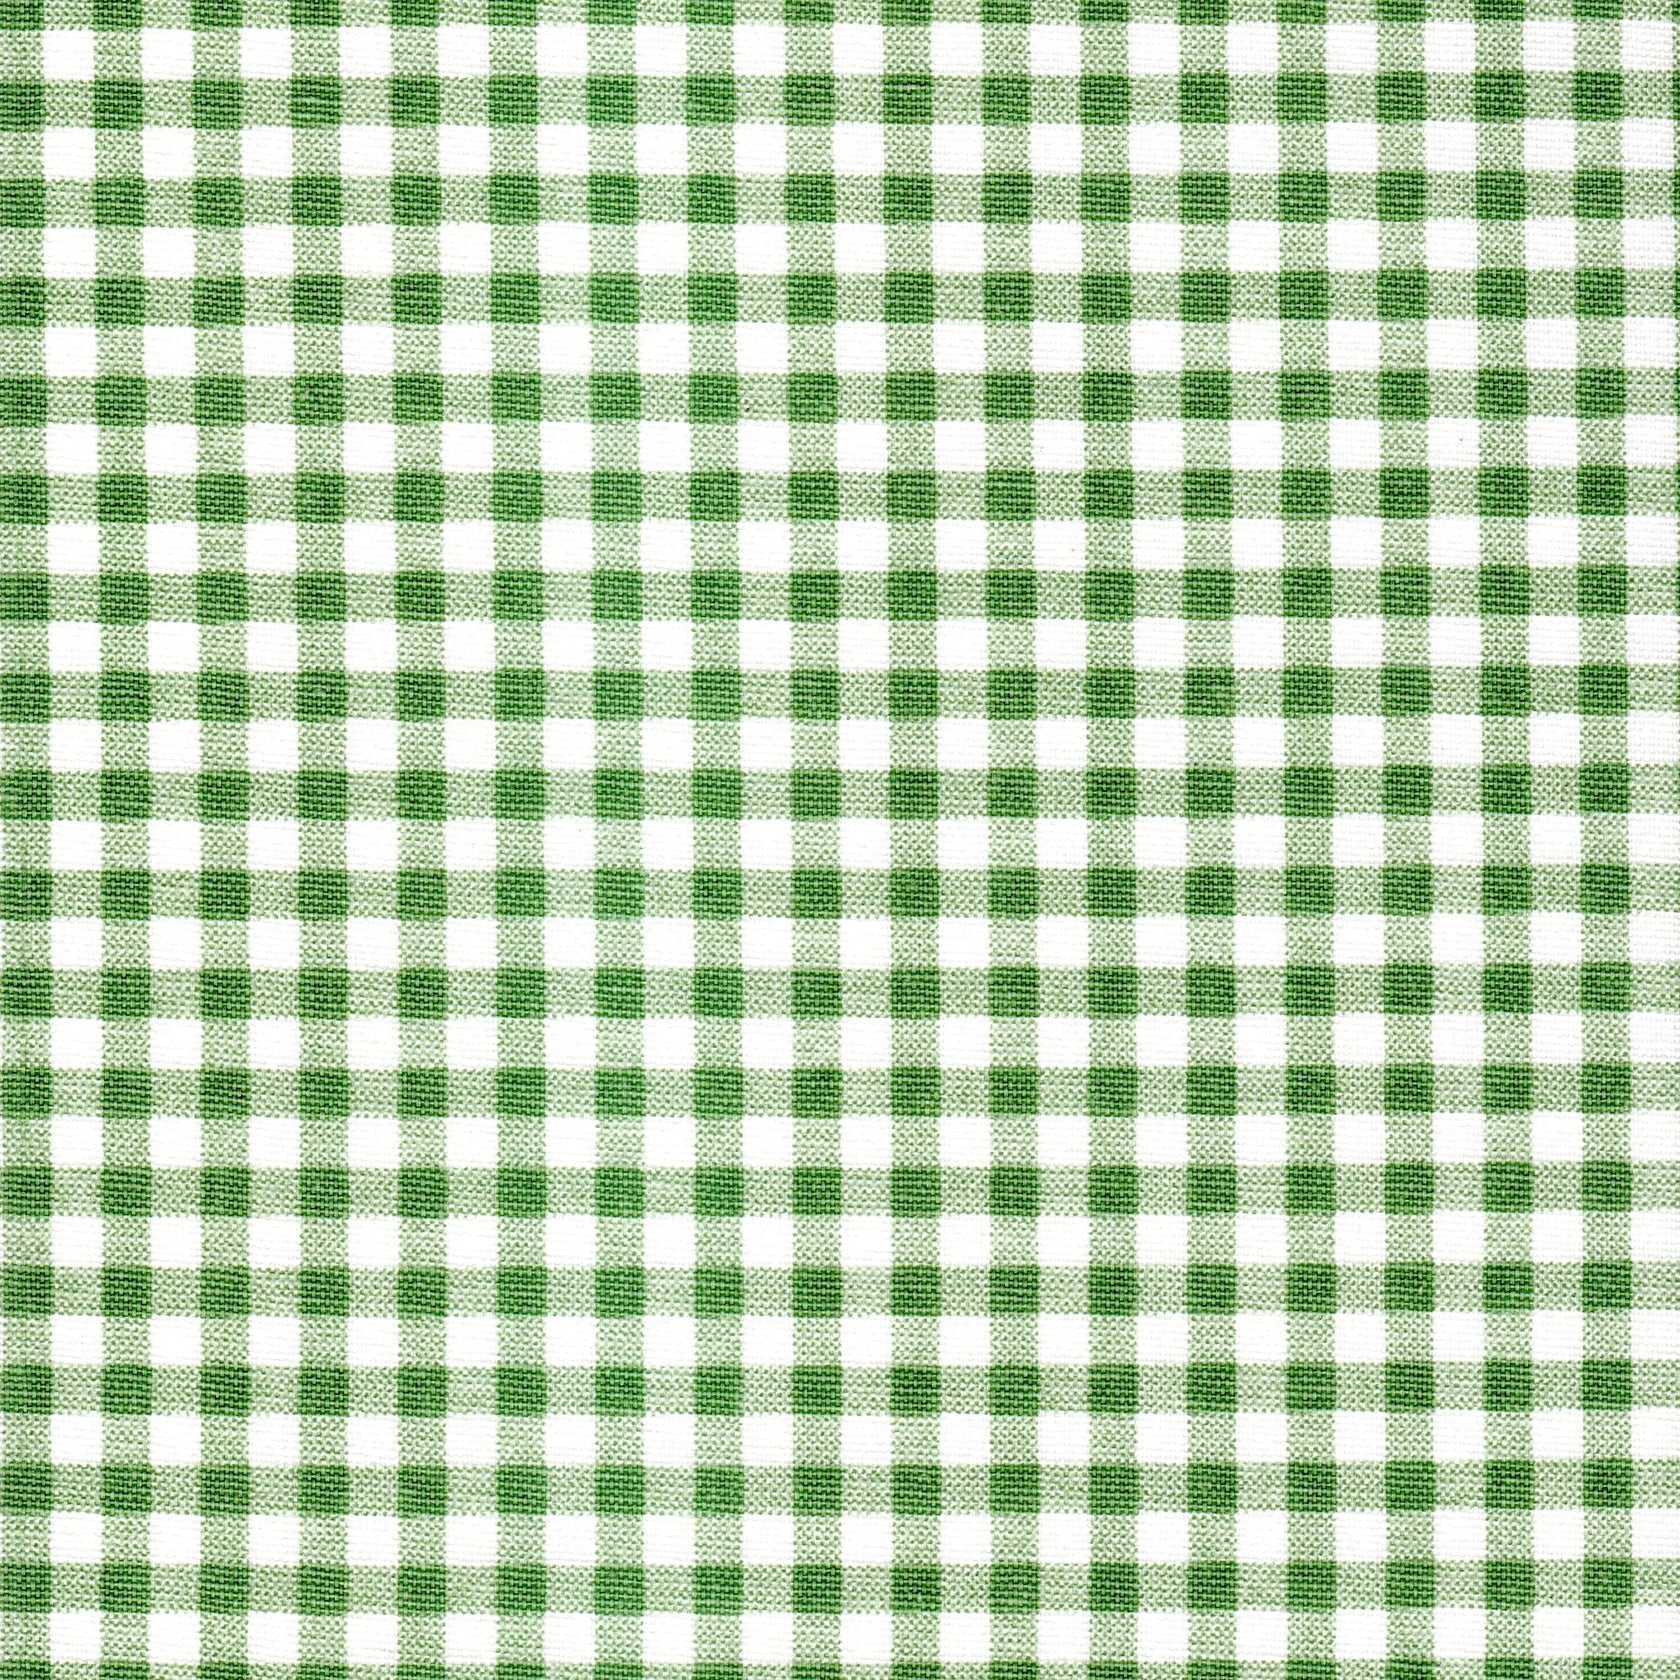 Tailored Bedskirt in Sage Green Large Gingham Check on White